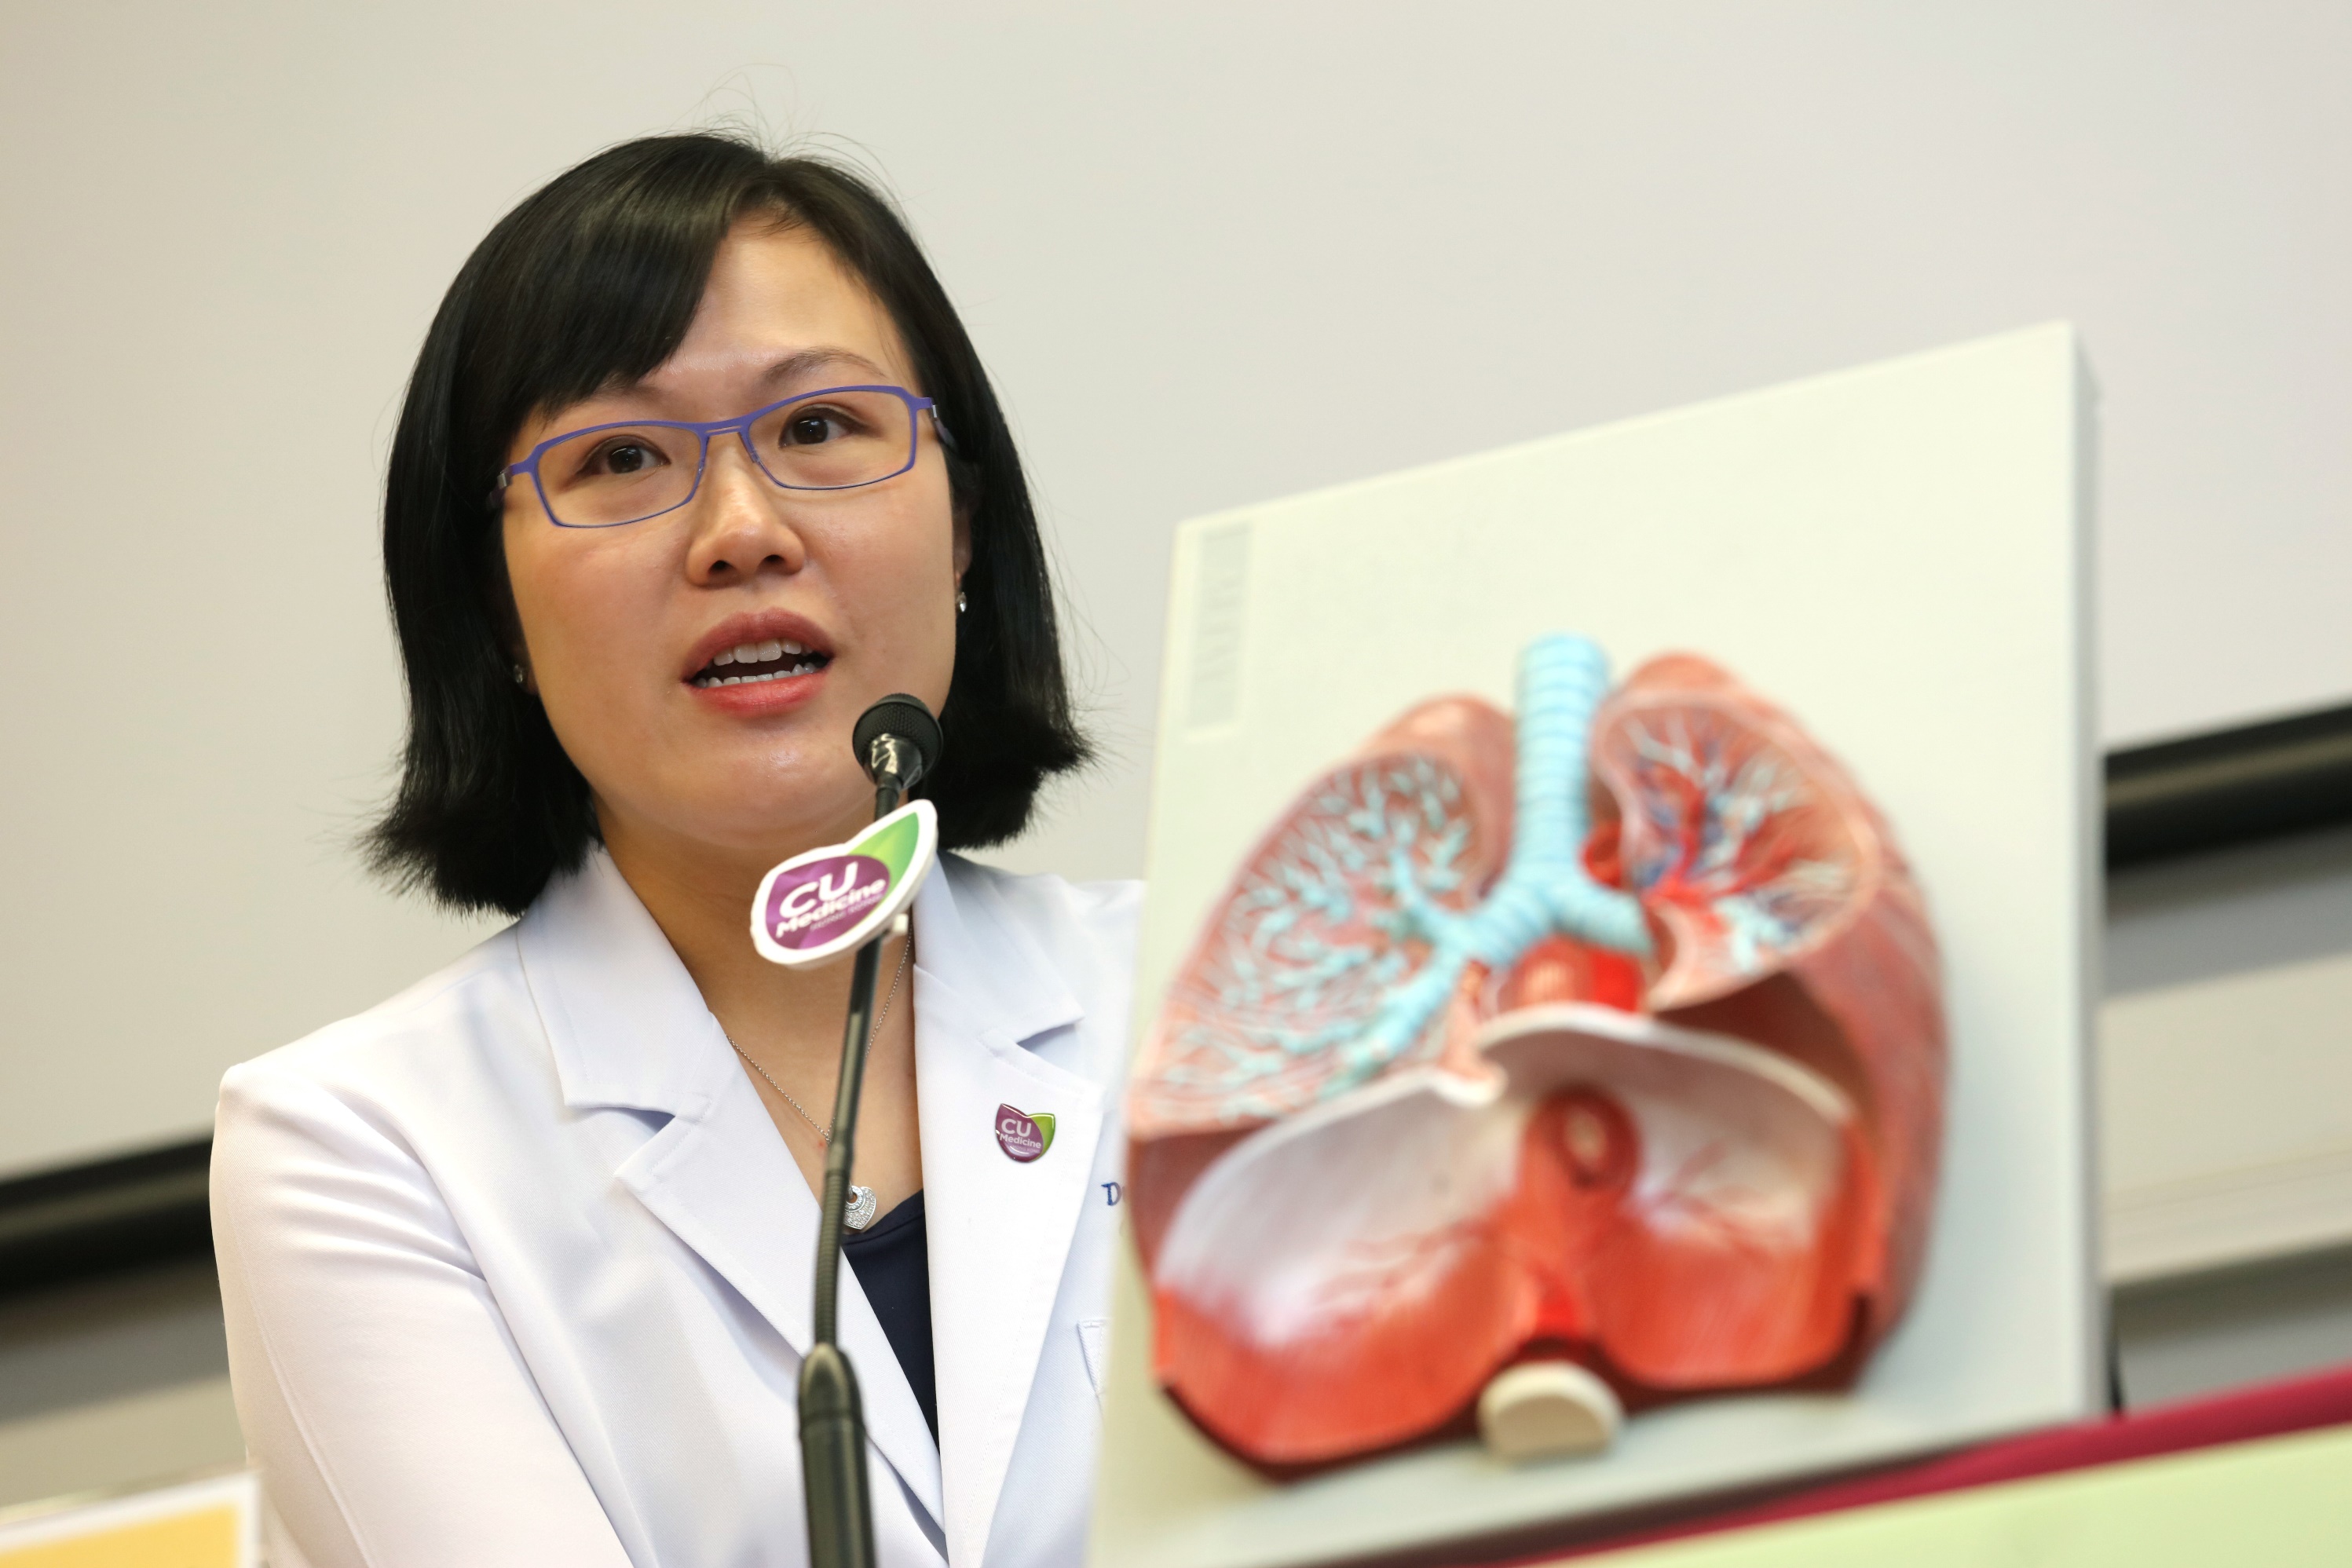 Dr. Rainbow Wing Hung LAU says the Faculty was the first in Asia Pacific region to combine the use of Electromagnetic Navigation Bronchoscopy (ENB) with Hybrid Operating Room since 2015, to allow real-time imaging for surgical localisation and for biopsy of micro pulmonary lesions.